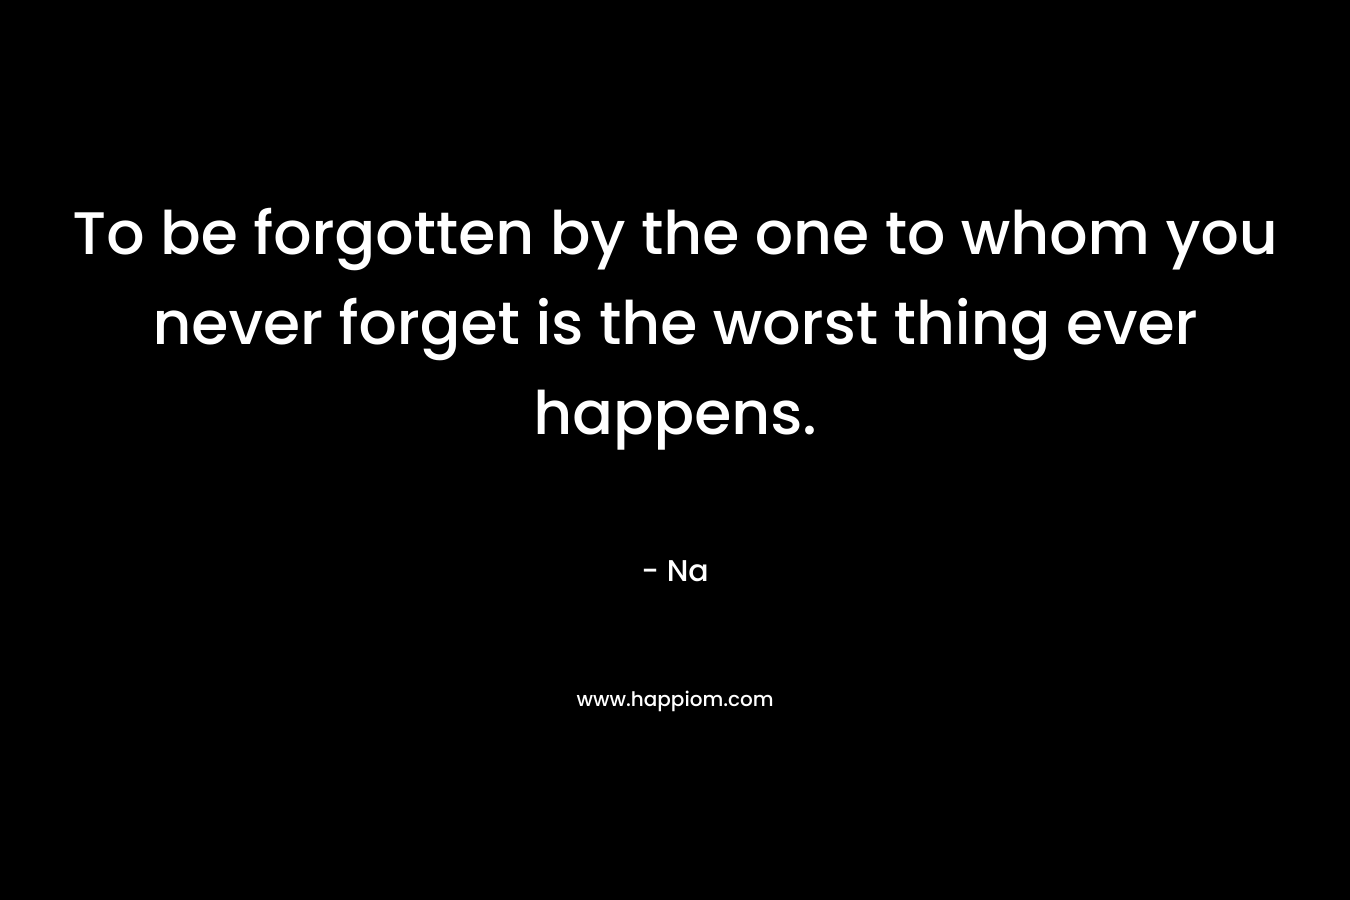 To be forgotten by the one to whom you never forget is the worst thing ever happens.